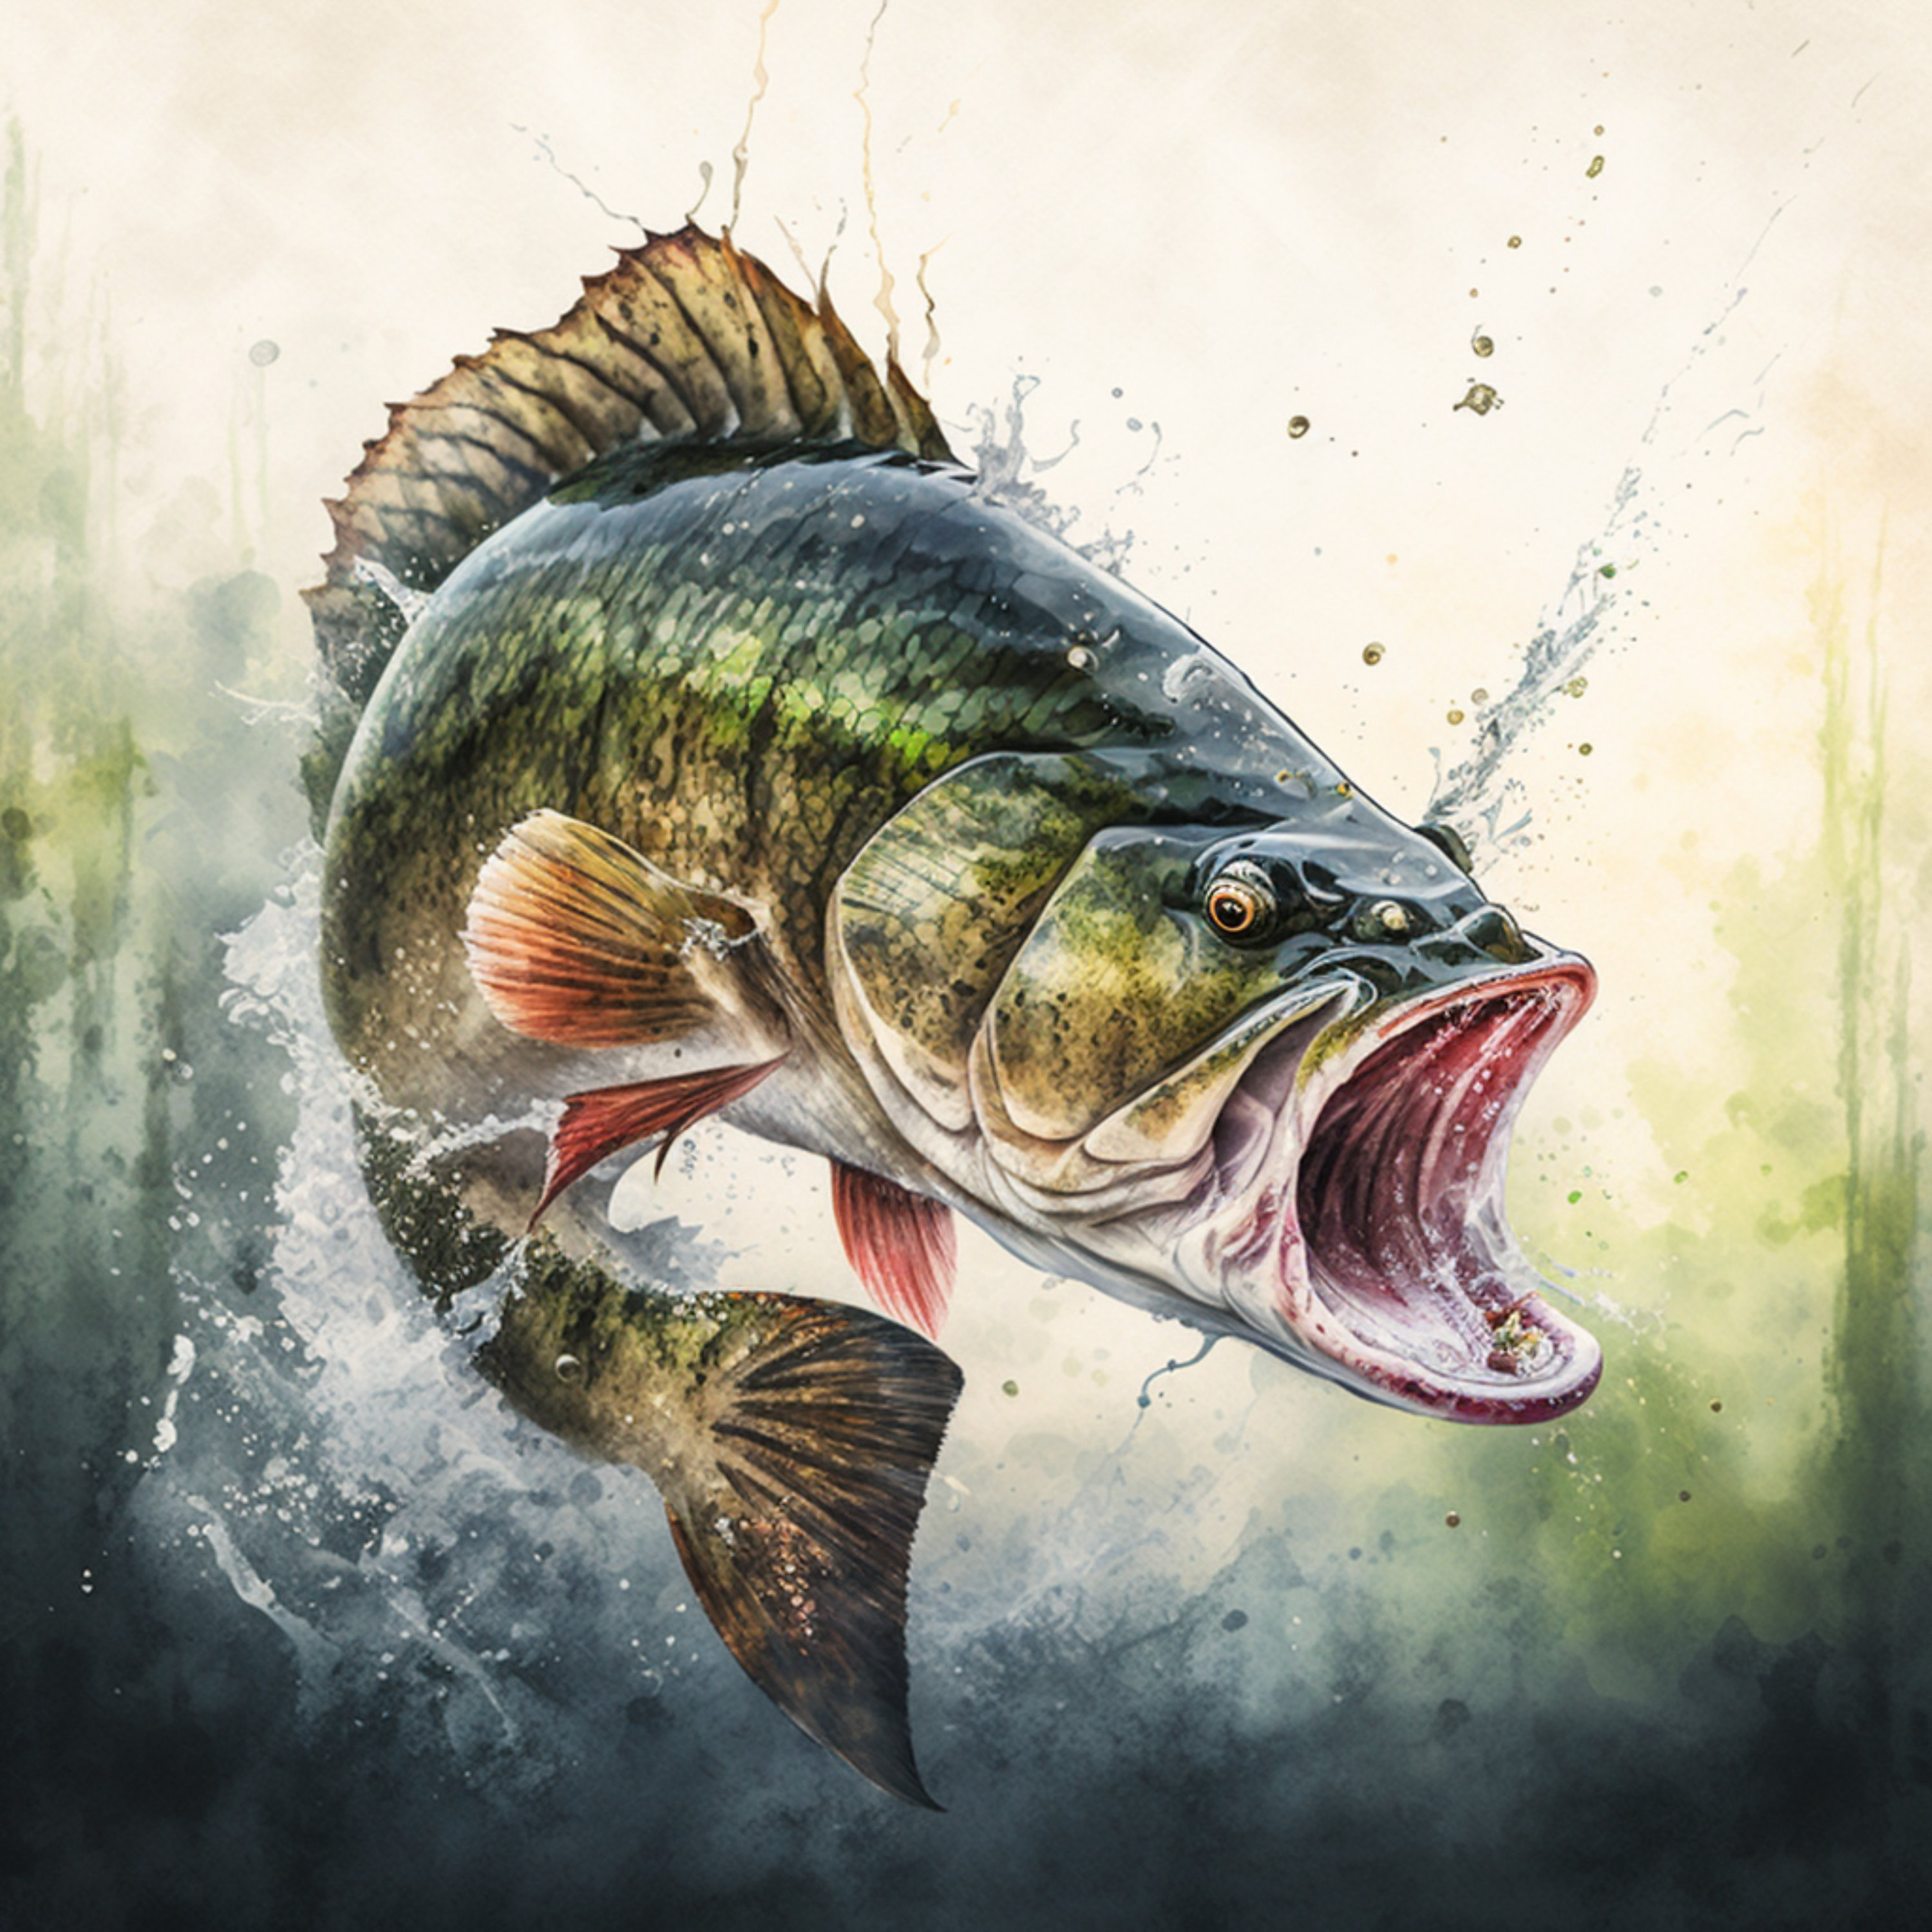 Large Mouth Bass Jumping Out of the Water-watercolor Digital Art